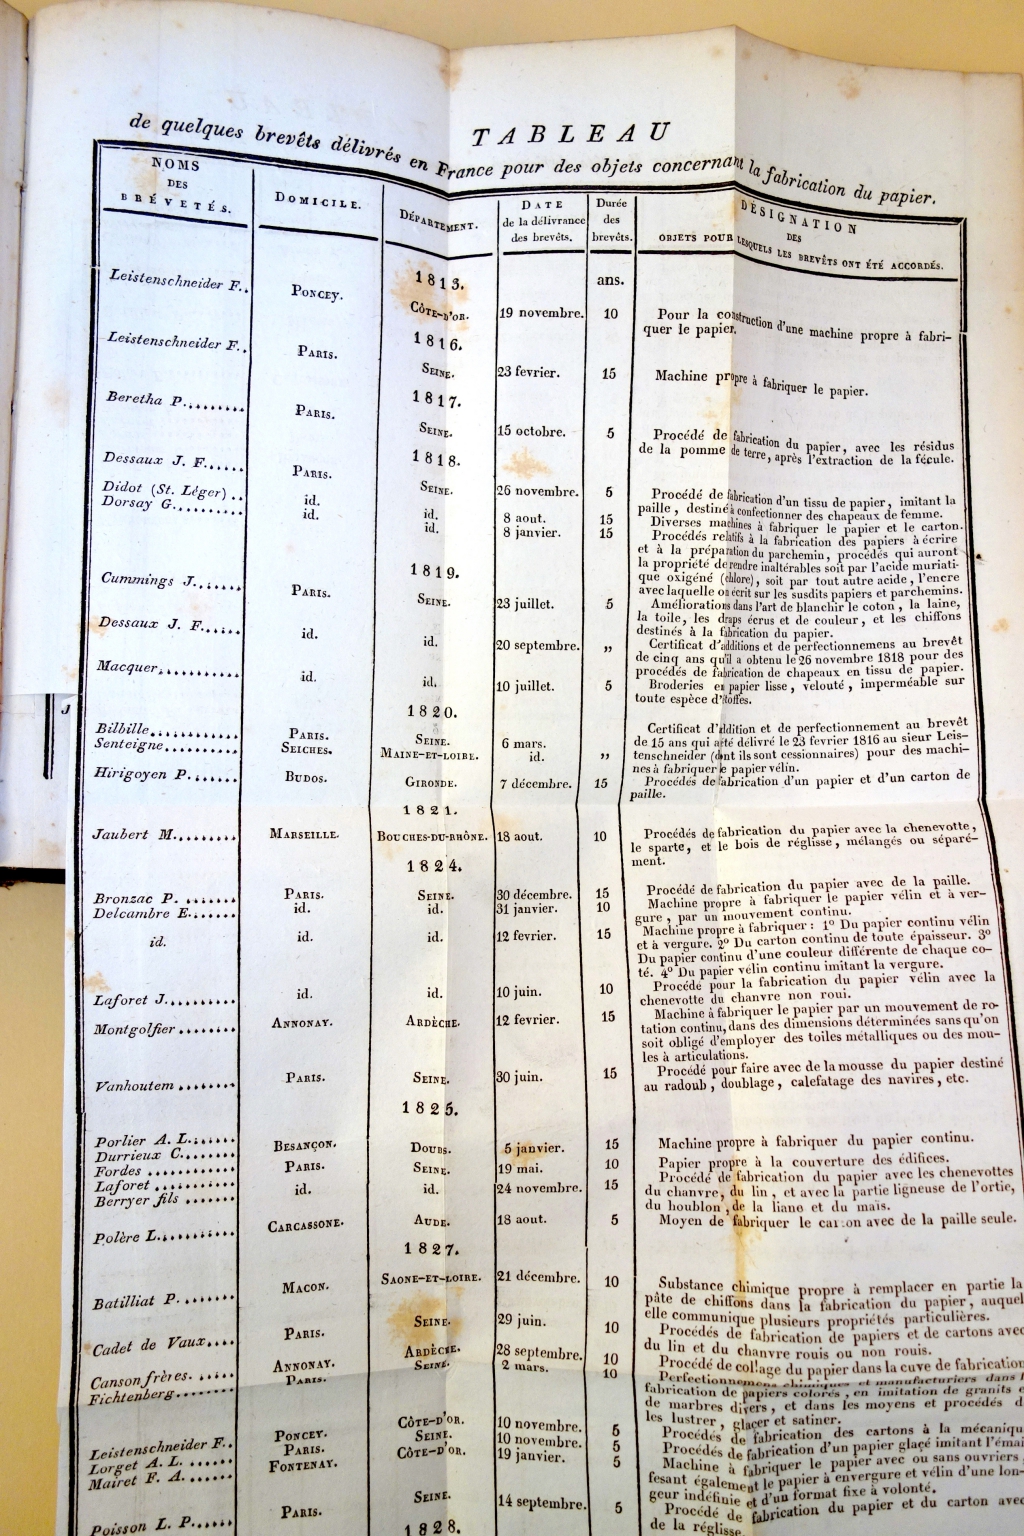 Chart of brevets or patents in Piette's book